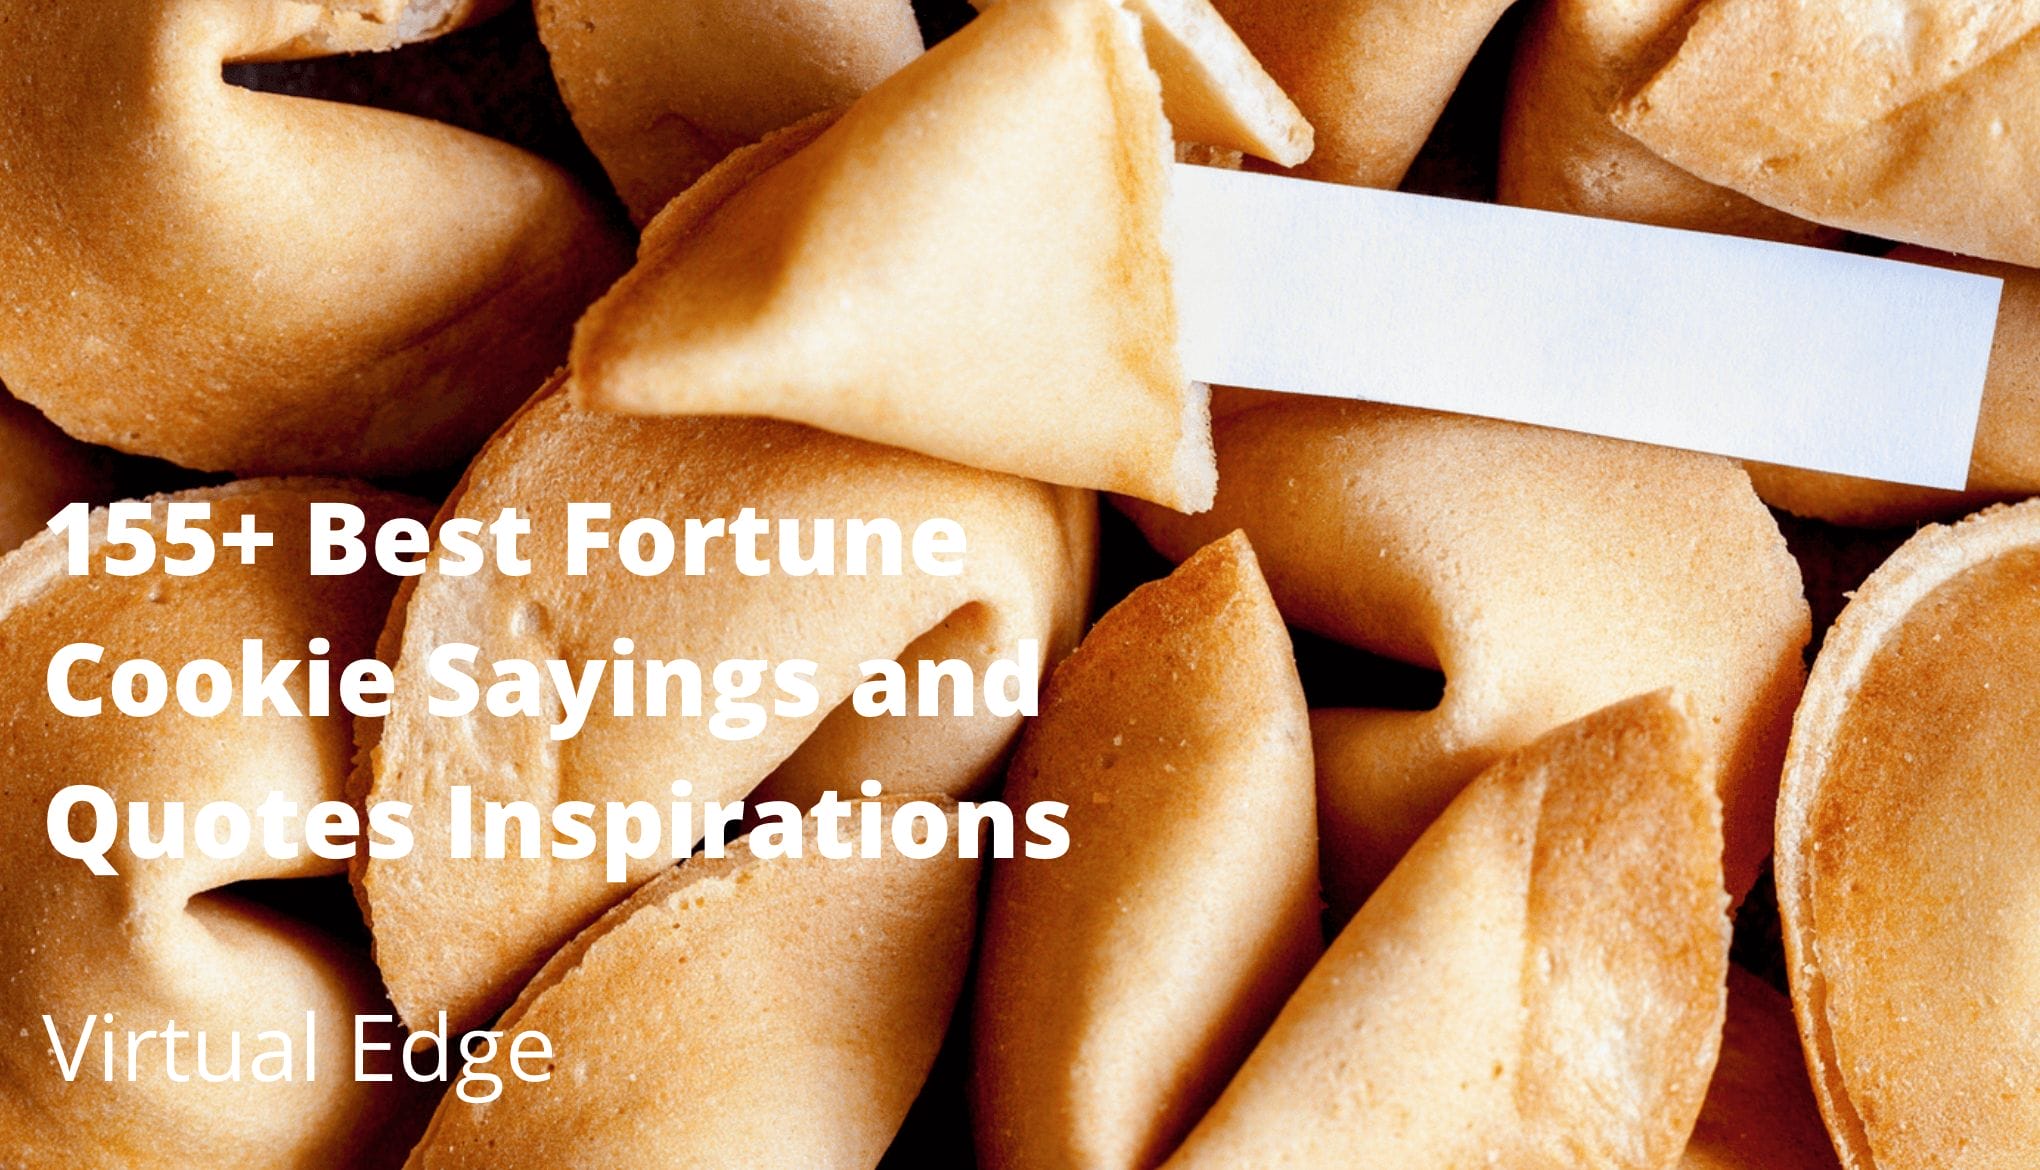 155+ Best Fortune Cookie Sayings and Quotes Inspirations